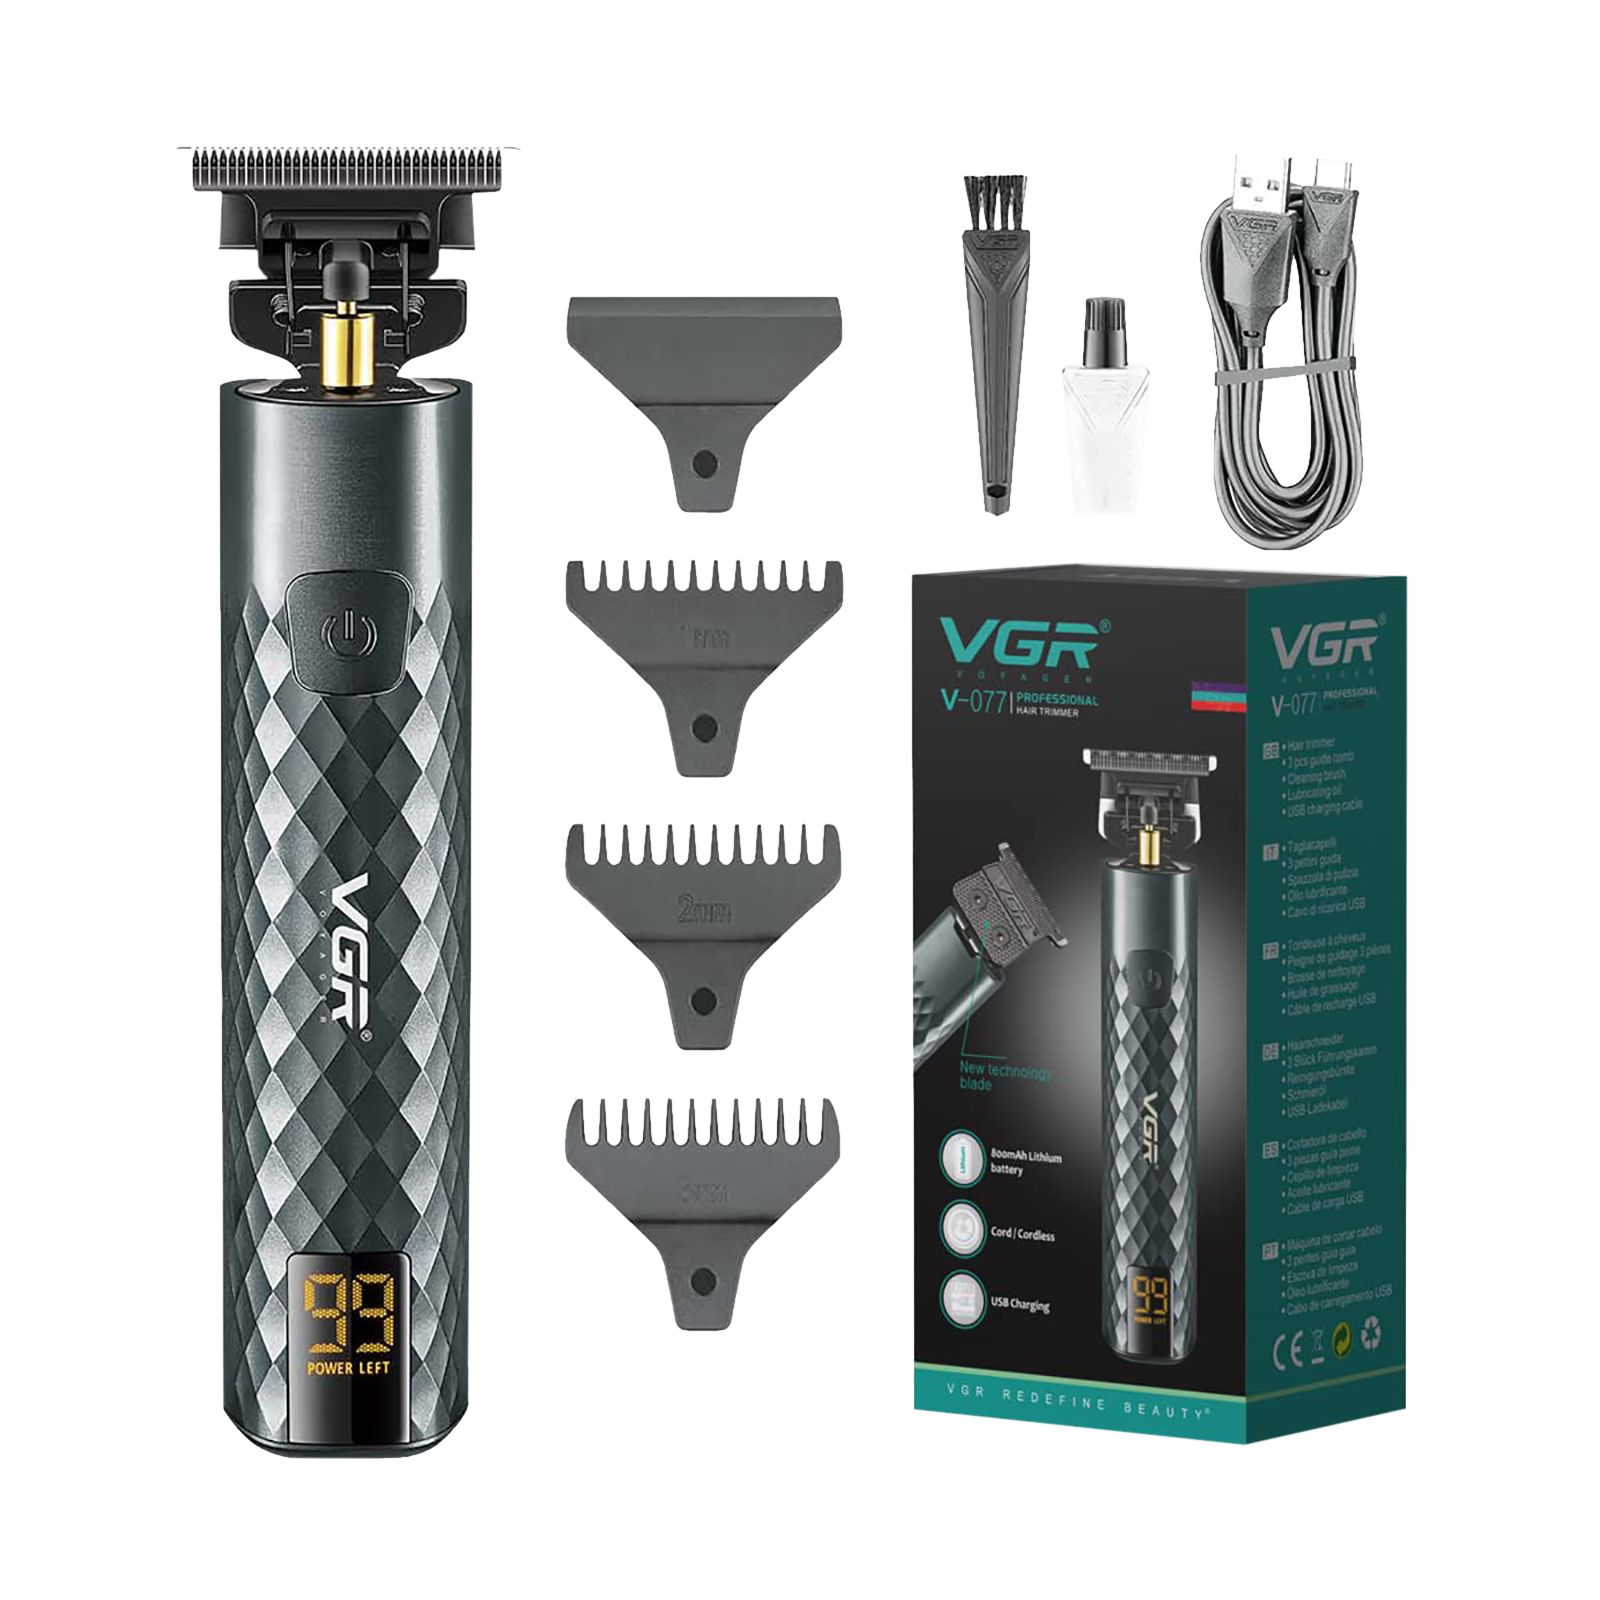 VGR V-077 Rechargeable Cordless Dry Trimmer for Hair Clipping, Beard, Moustache, Body Grooming & Intimate Areas with 3 Length Settings for Men (150min Runtime, LED Display, Black)